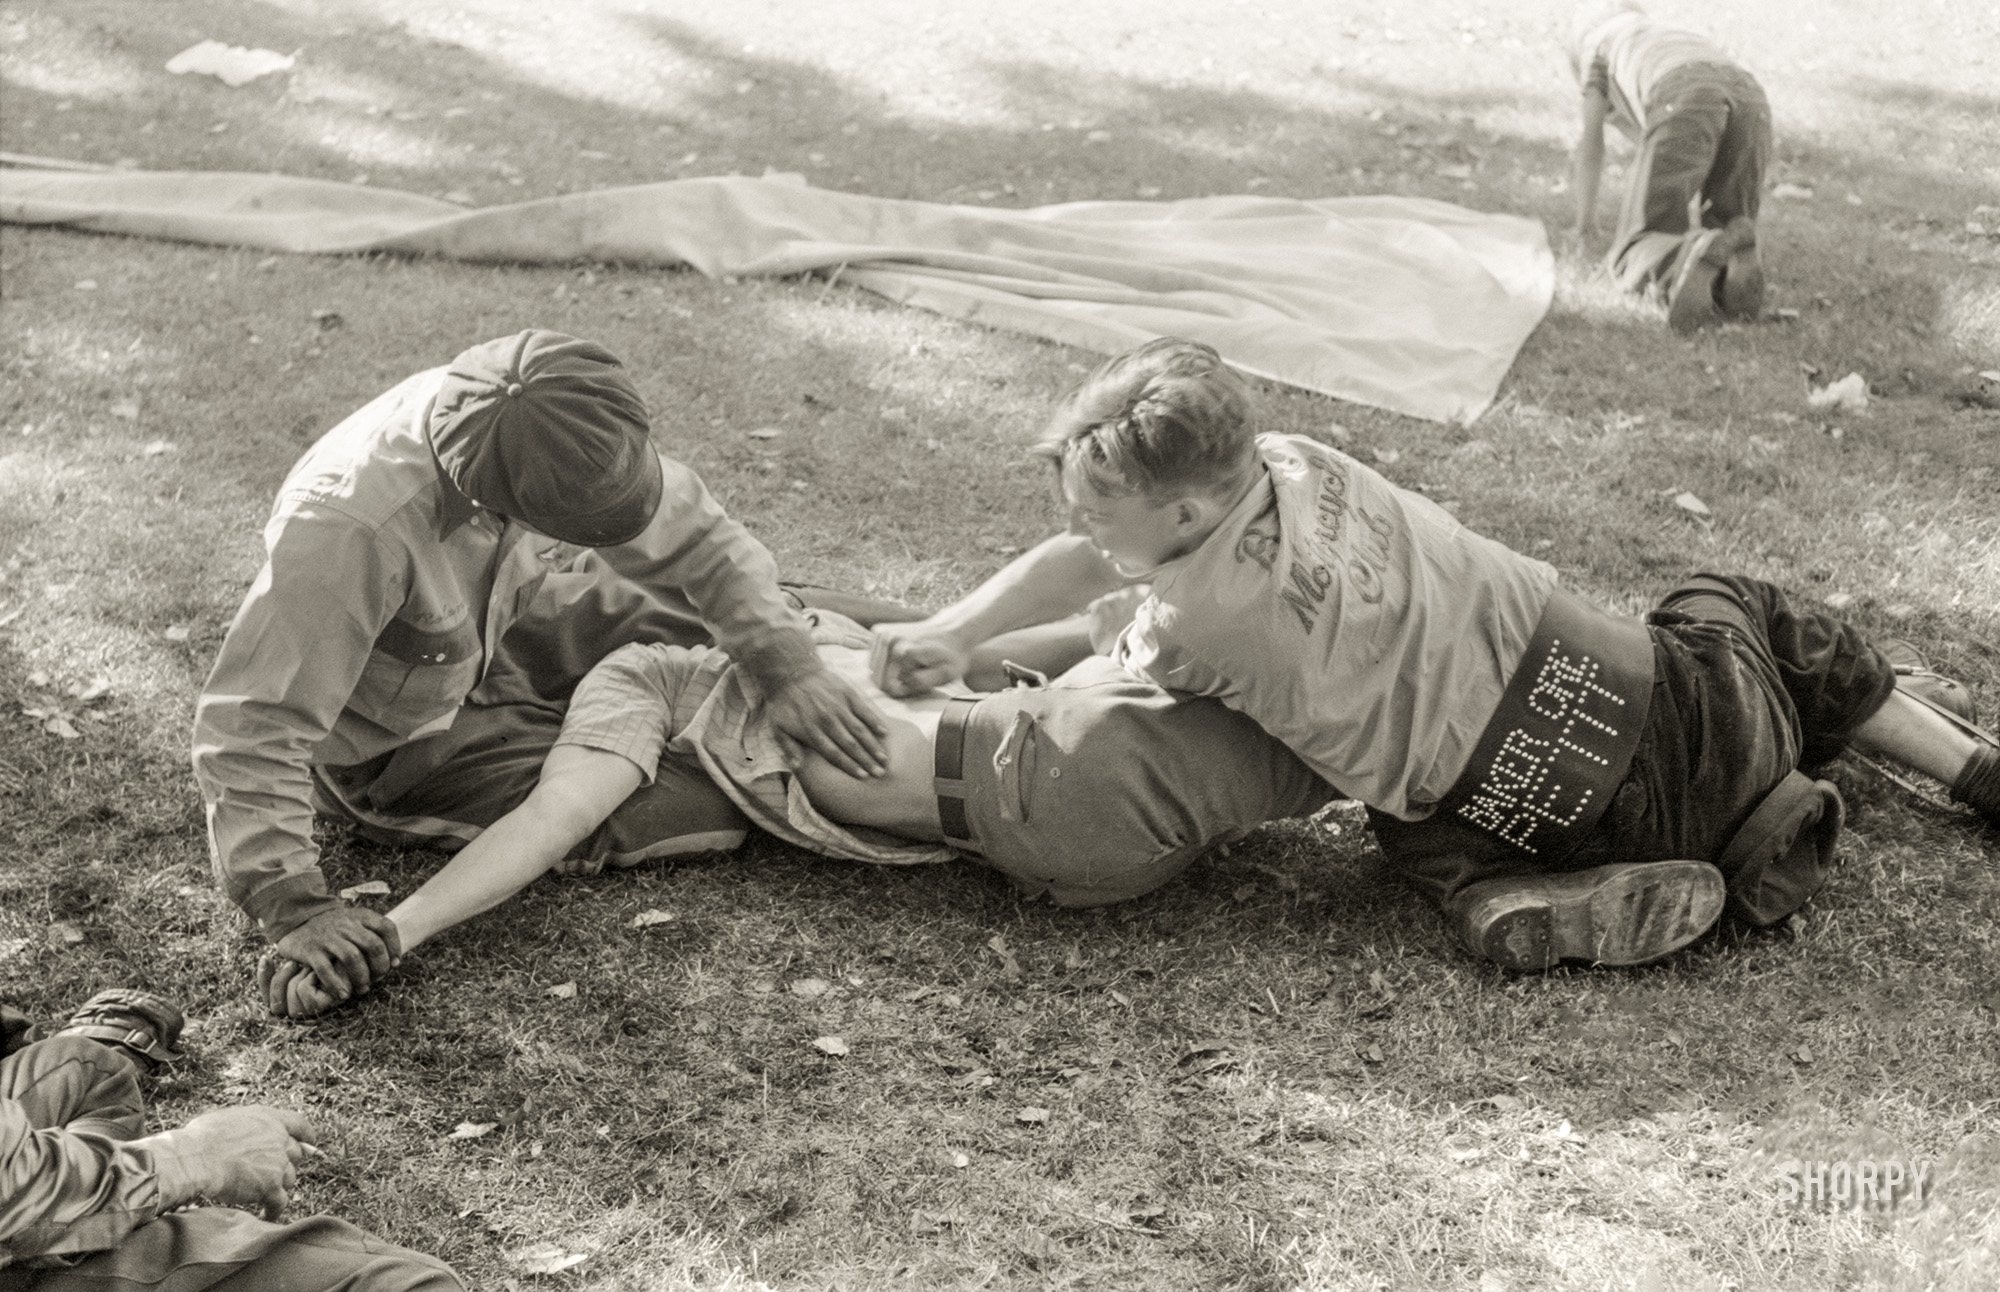 July 1941. "Roughhousing at Fourth of July picnic, Vale, Oregon." Mess with the boys of the Baker Motorcycle Club at your peril. 35mm acetate negative by Russell Lee. View full size.